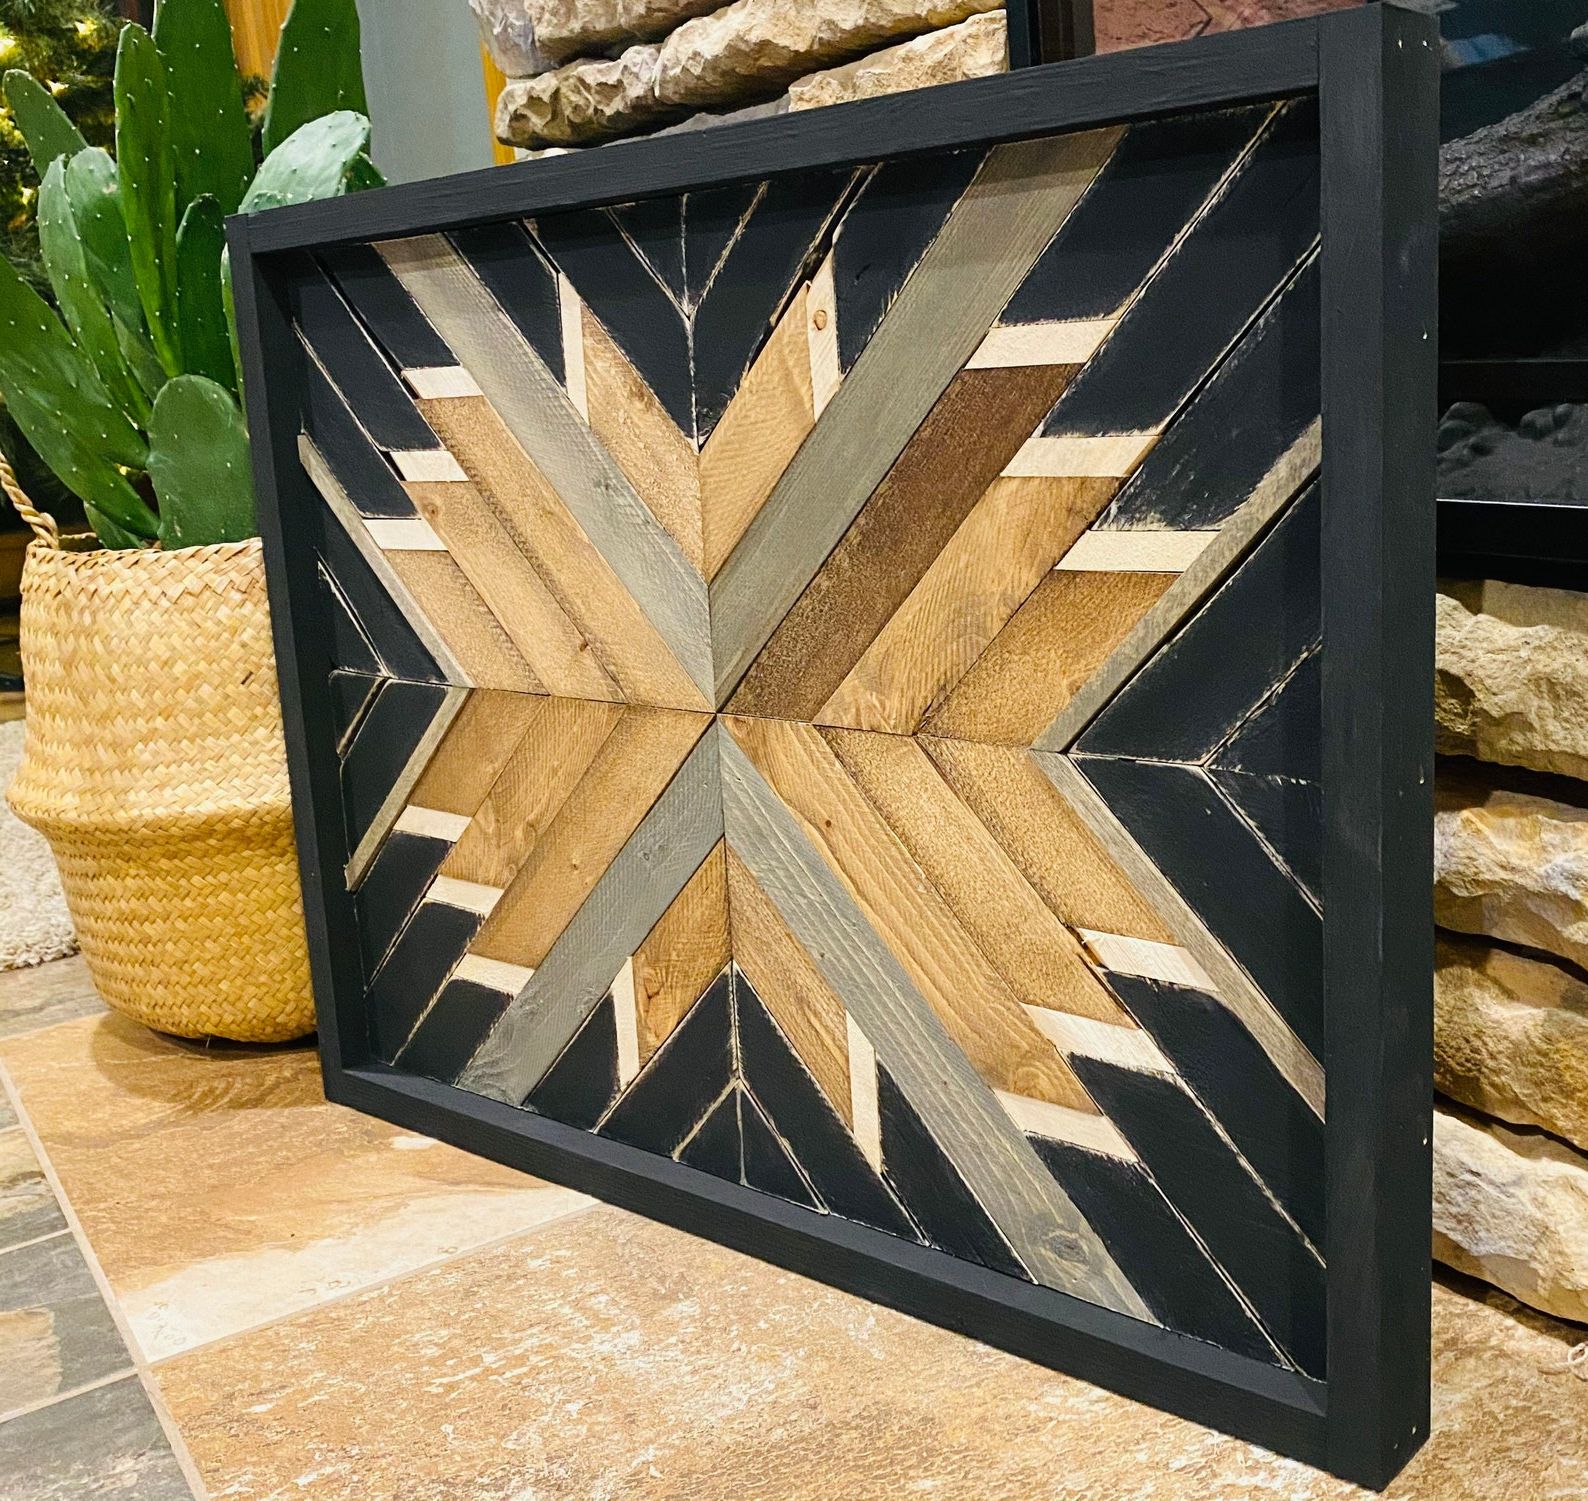 Urban Tribal Wood Wall Art Intended For Most Recent Raven Geometric Wood Wall Art Wood Wall Art Tribal Art (View 11 of 20)